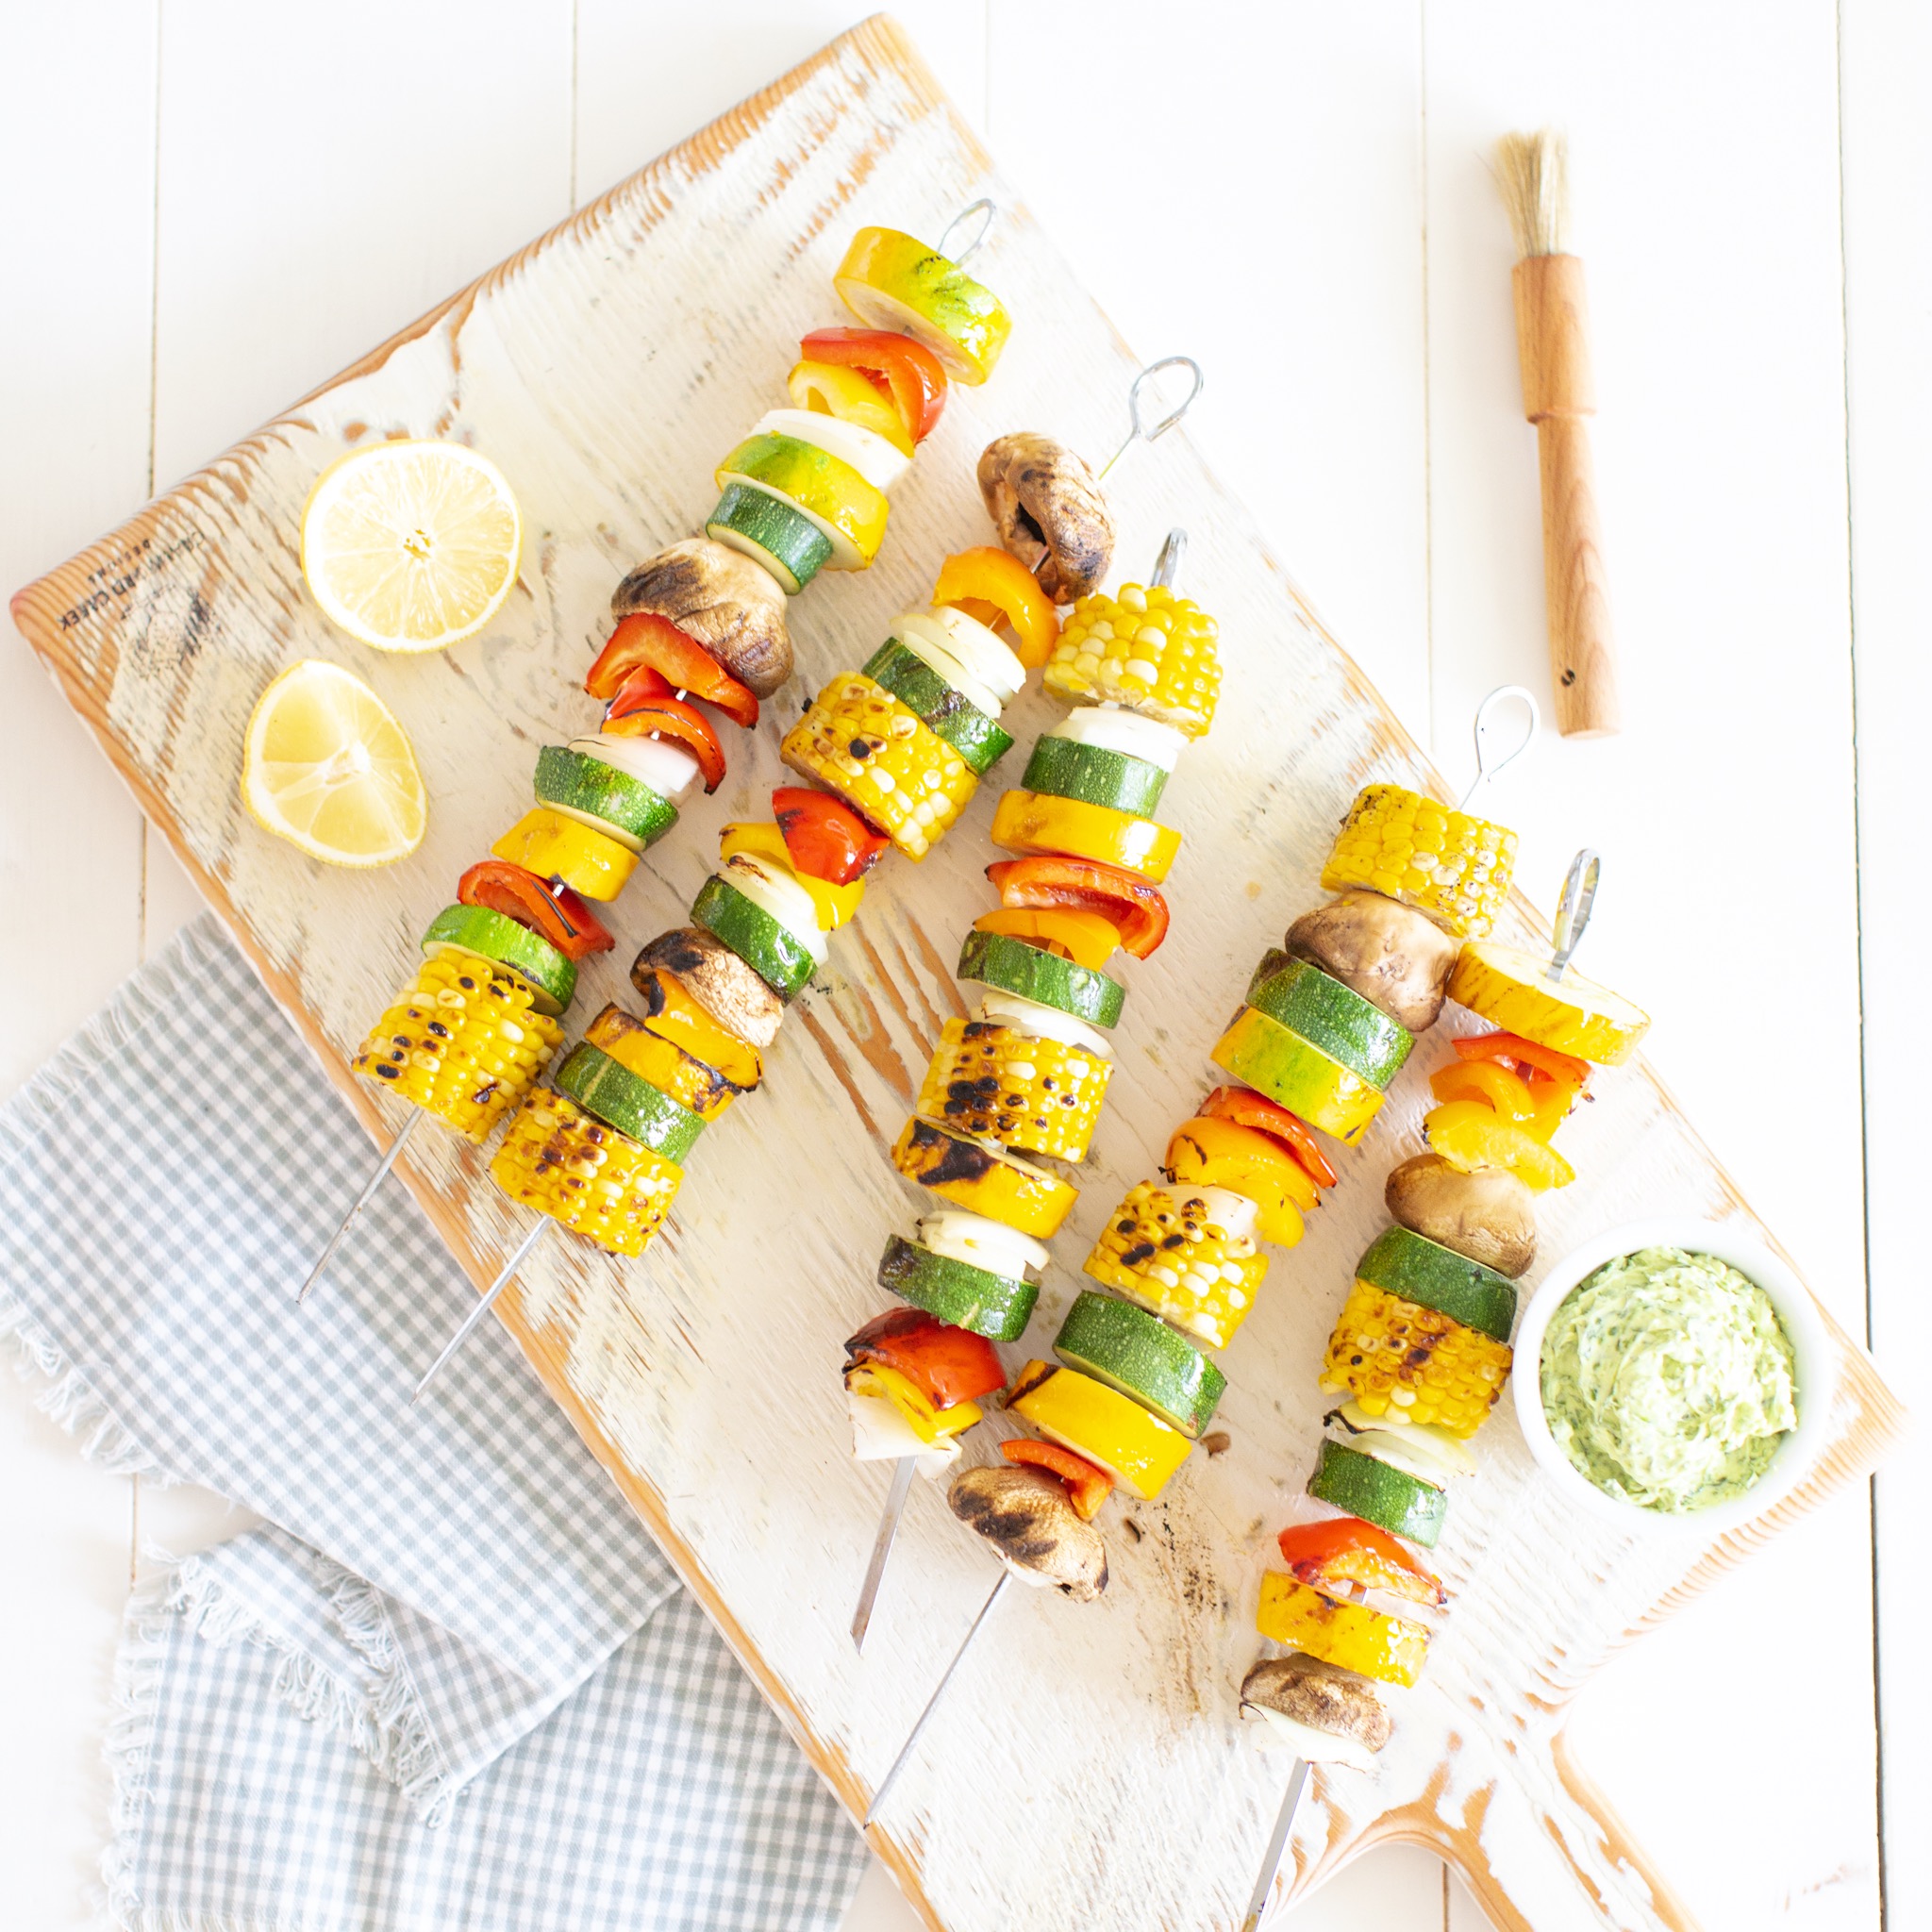 Grilled Vegetable Skewers with Herbed Butter